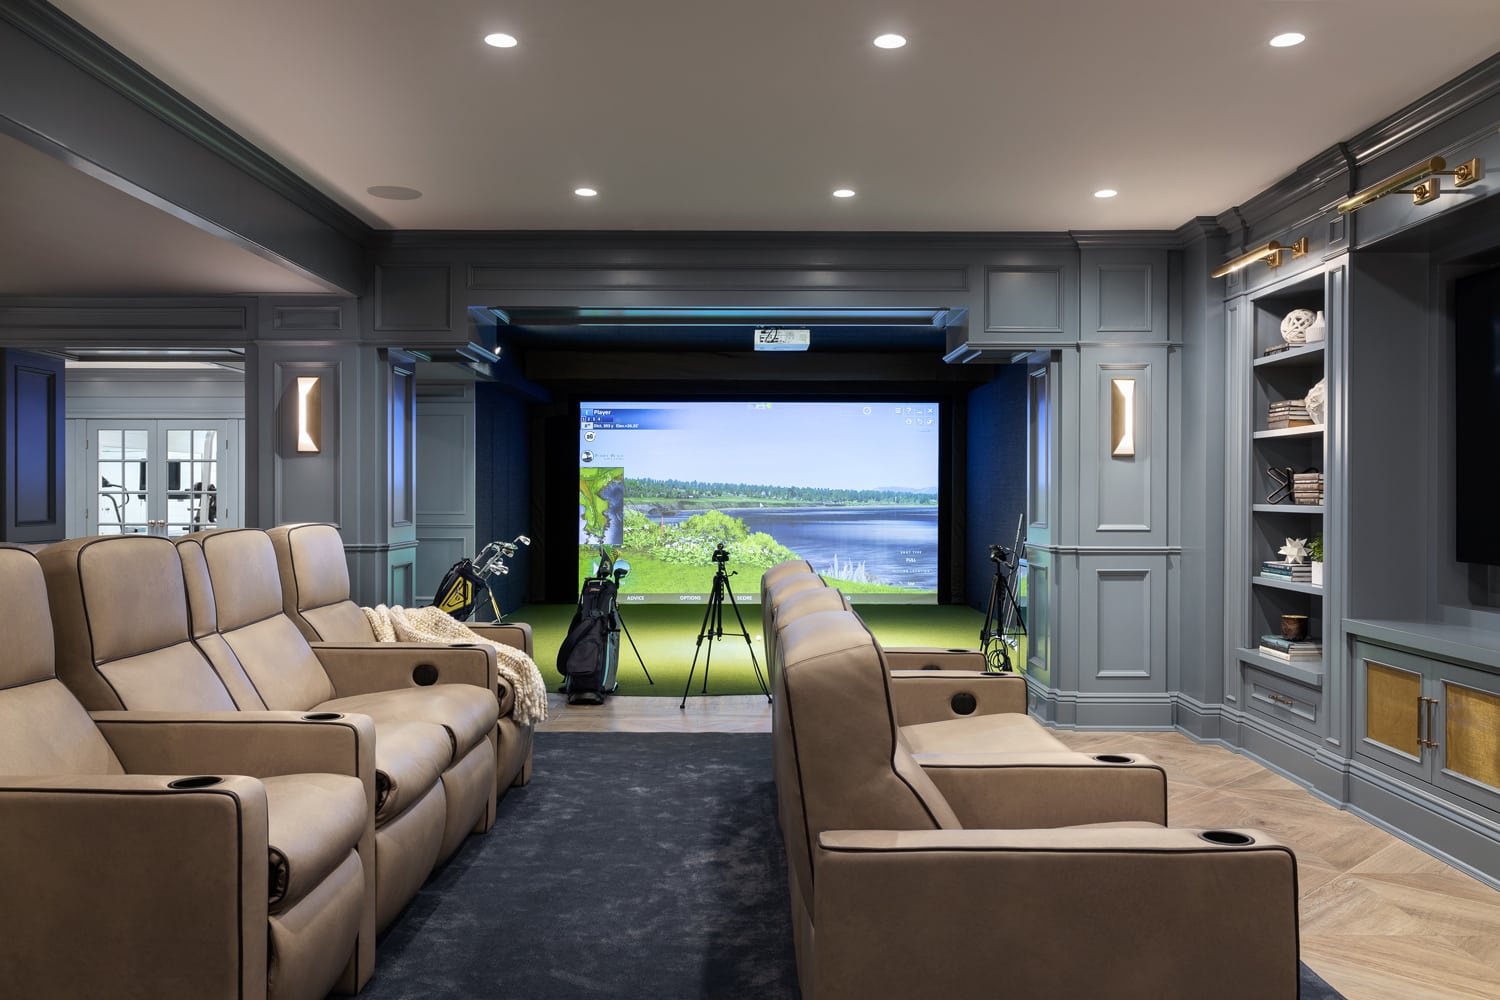 Sands Point basement golf simulator and media room design by Annette Jaffe Interiors